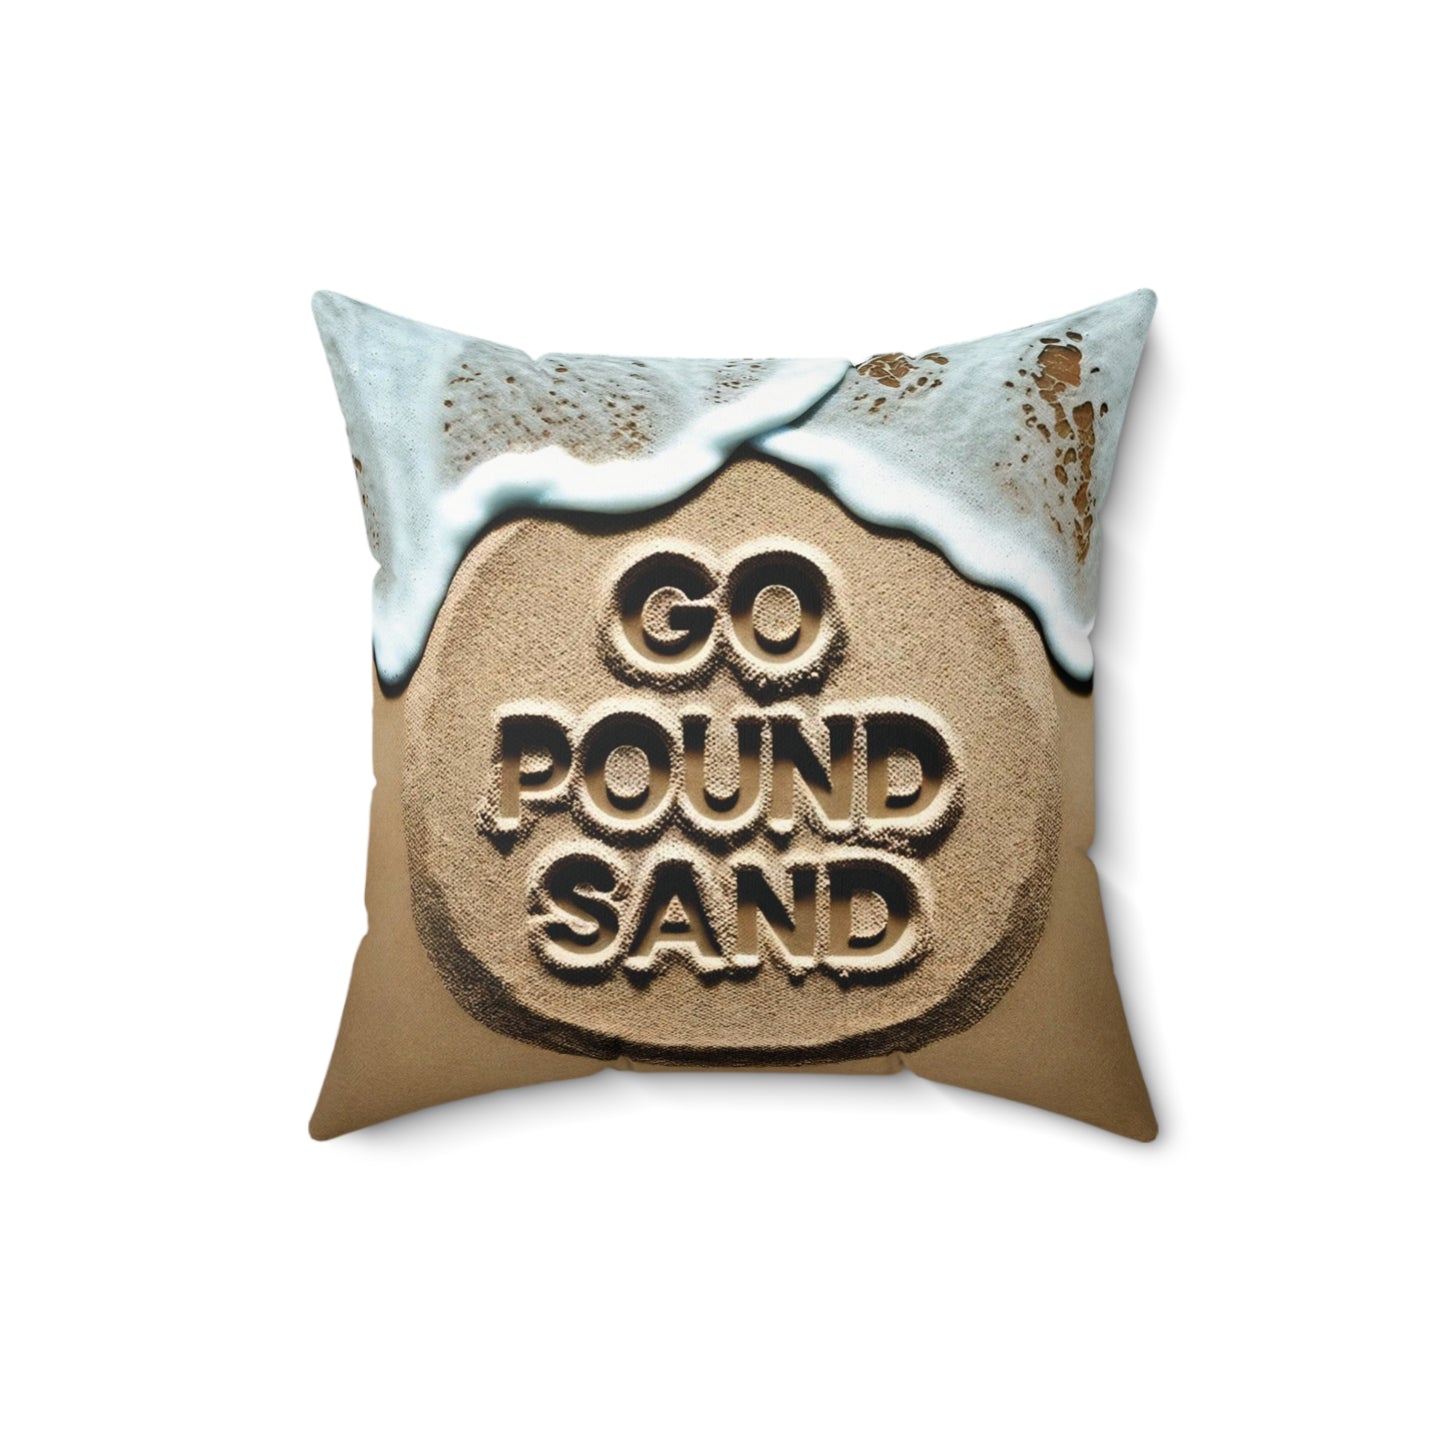 sand Go Pound Sand Humorous Beach Decor Pillow - Comedic Coastal Home Accent, bed14x14 Indoor Cushion, sand brown neutral.